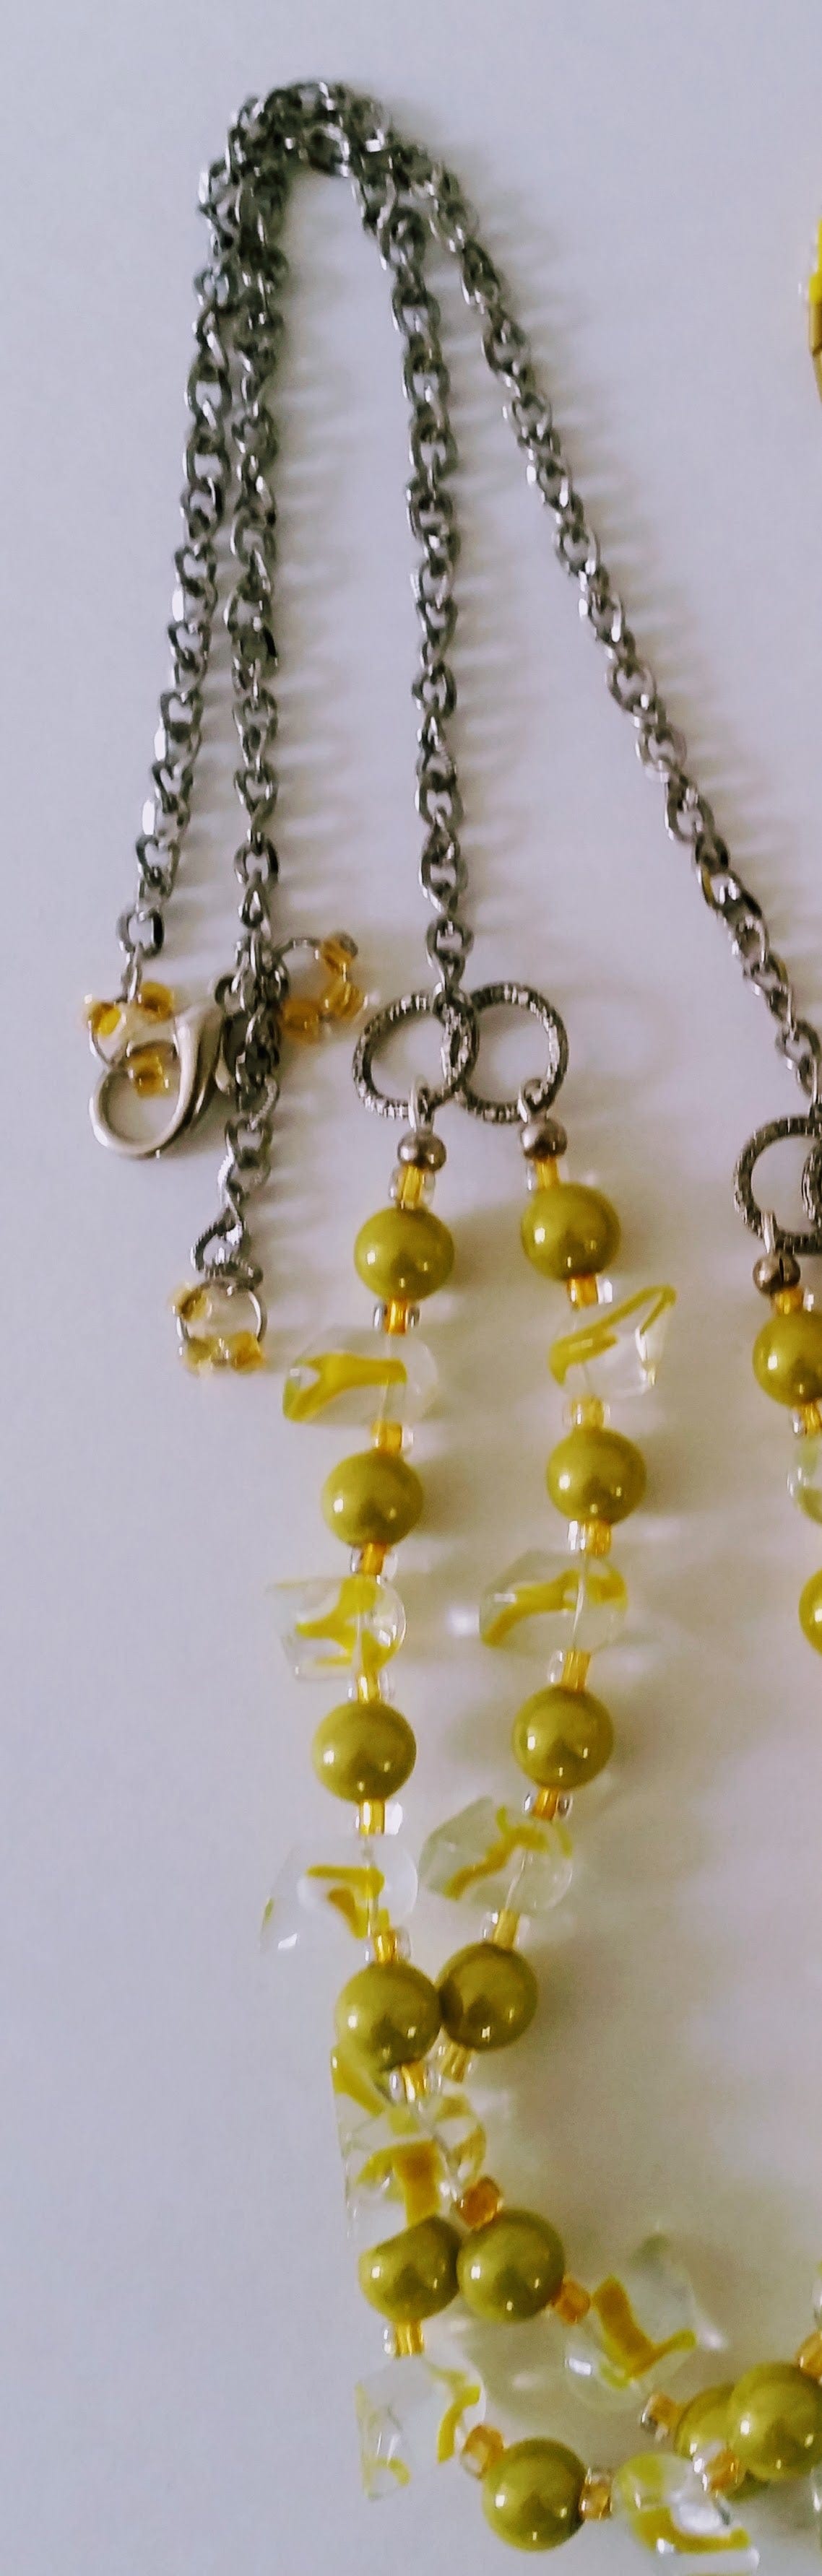 Handcrafted Jewelry By Teri C Necklace Lemon Chiffon Necklace